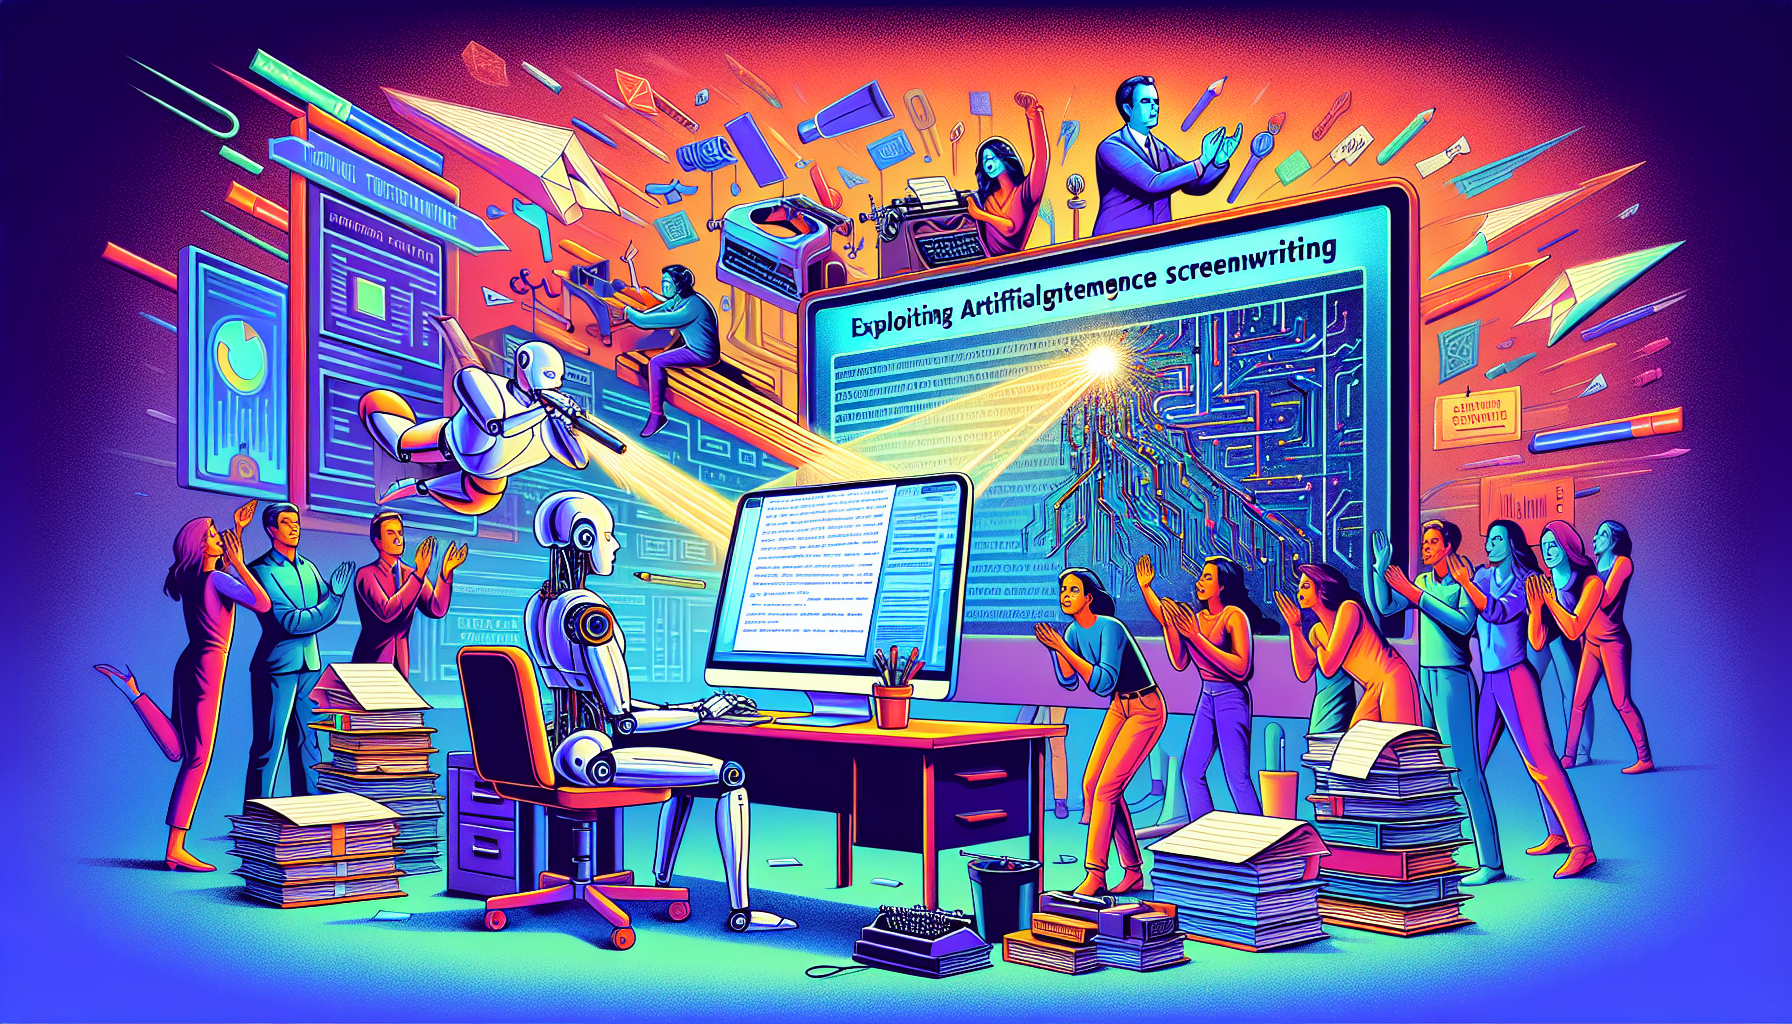 A vibrant illustration highlighting the concept of exploiting artificial intelligence for triumph in screenwriting. The image showcases a contemporary setting with an AI-powered robot diligently working on a screenplay at a desk with a computer monitor displaying dramatic structures and story arcs. Characters from diverse range of stories, implying the outcomes of the screenplays, are seen applauding the AI. Conventional screenwriting tools like typewriters and stacks of scripts subtly fade into the background highlighting the advent of AI. The color theme is vibrant and modern, incorporating bold colors and futuristic elements.